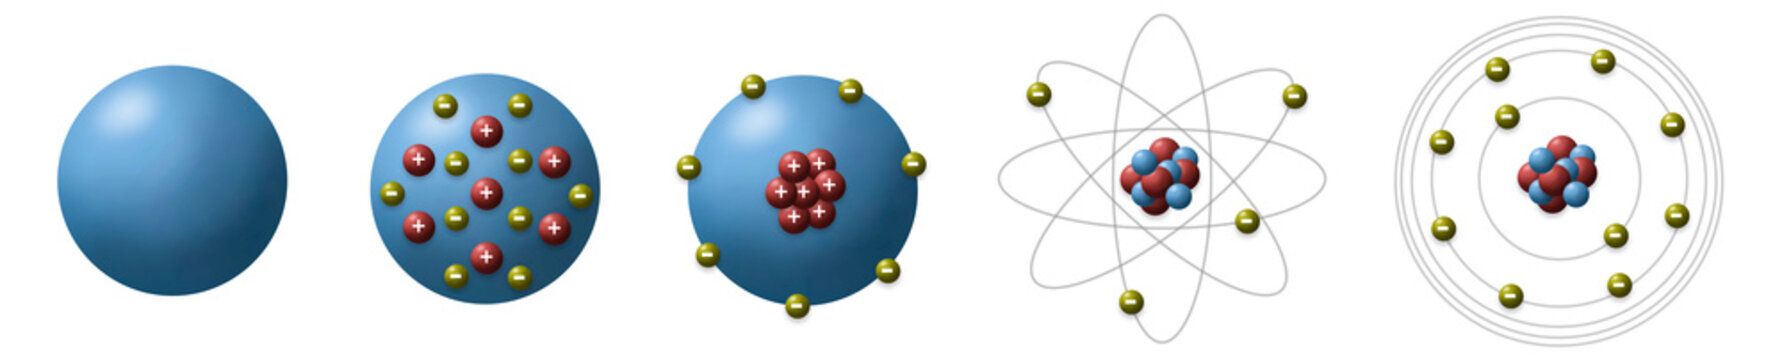 Evolution of atomic model from different scientists show historical models of the atom use for basic in chemistry.